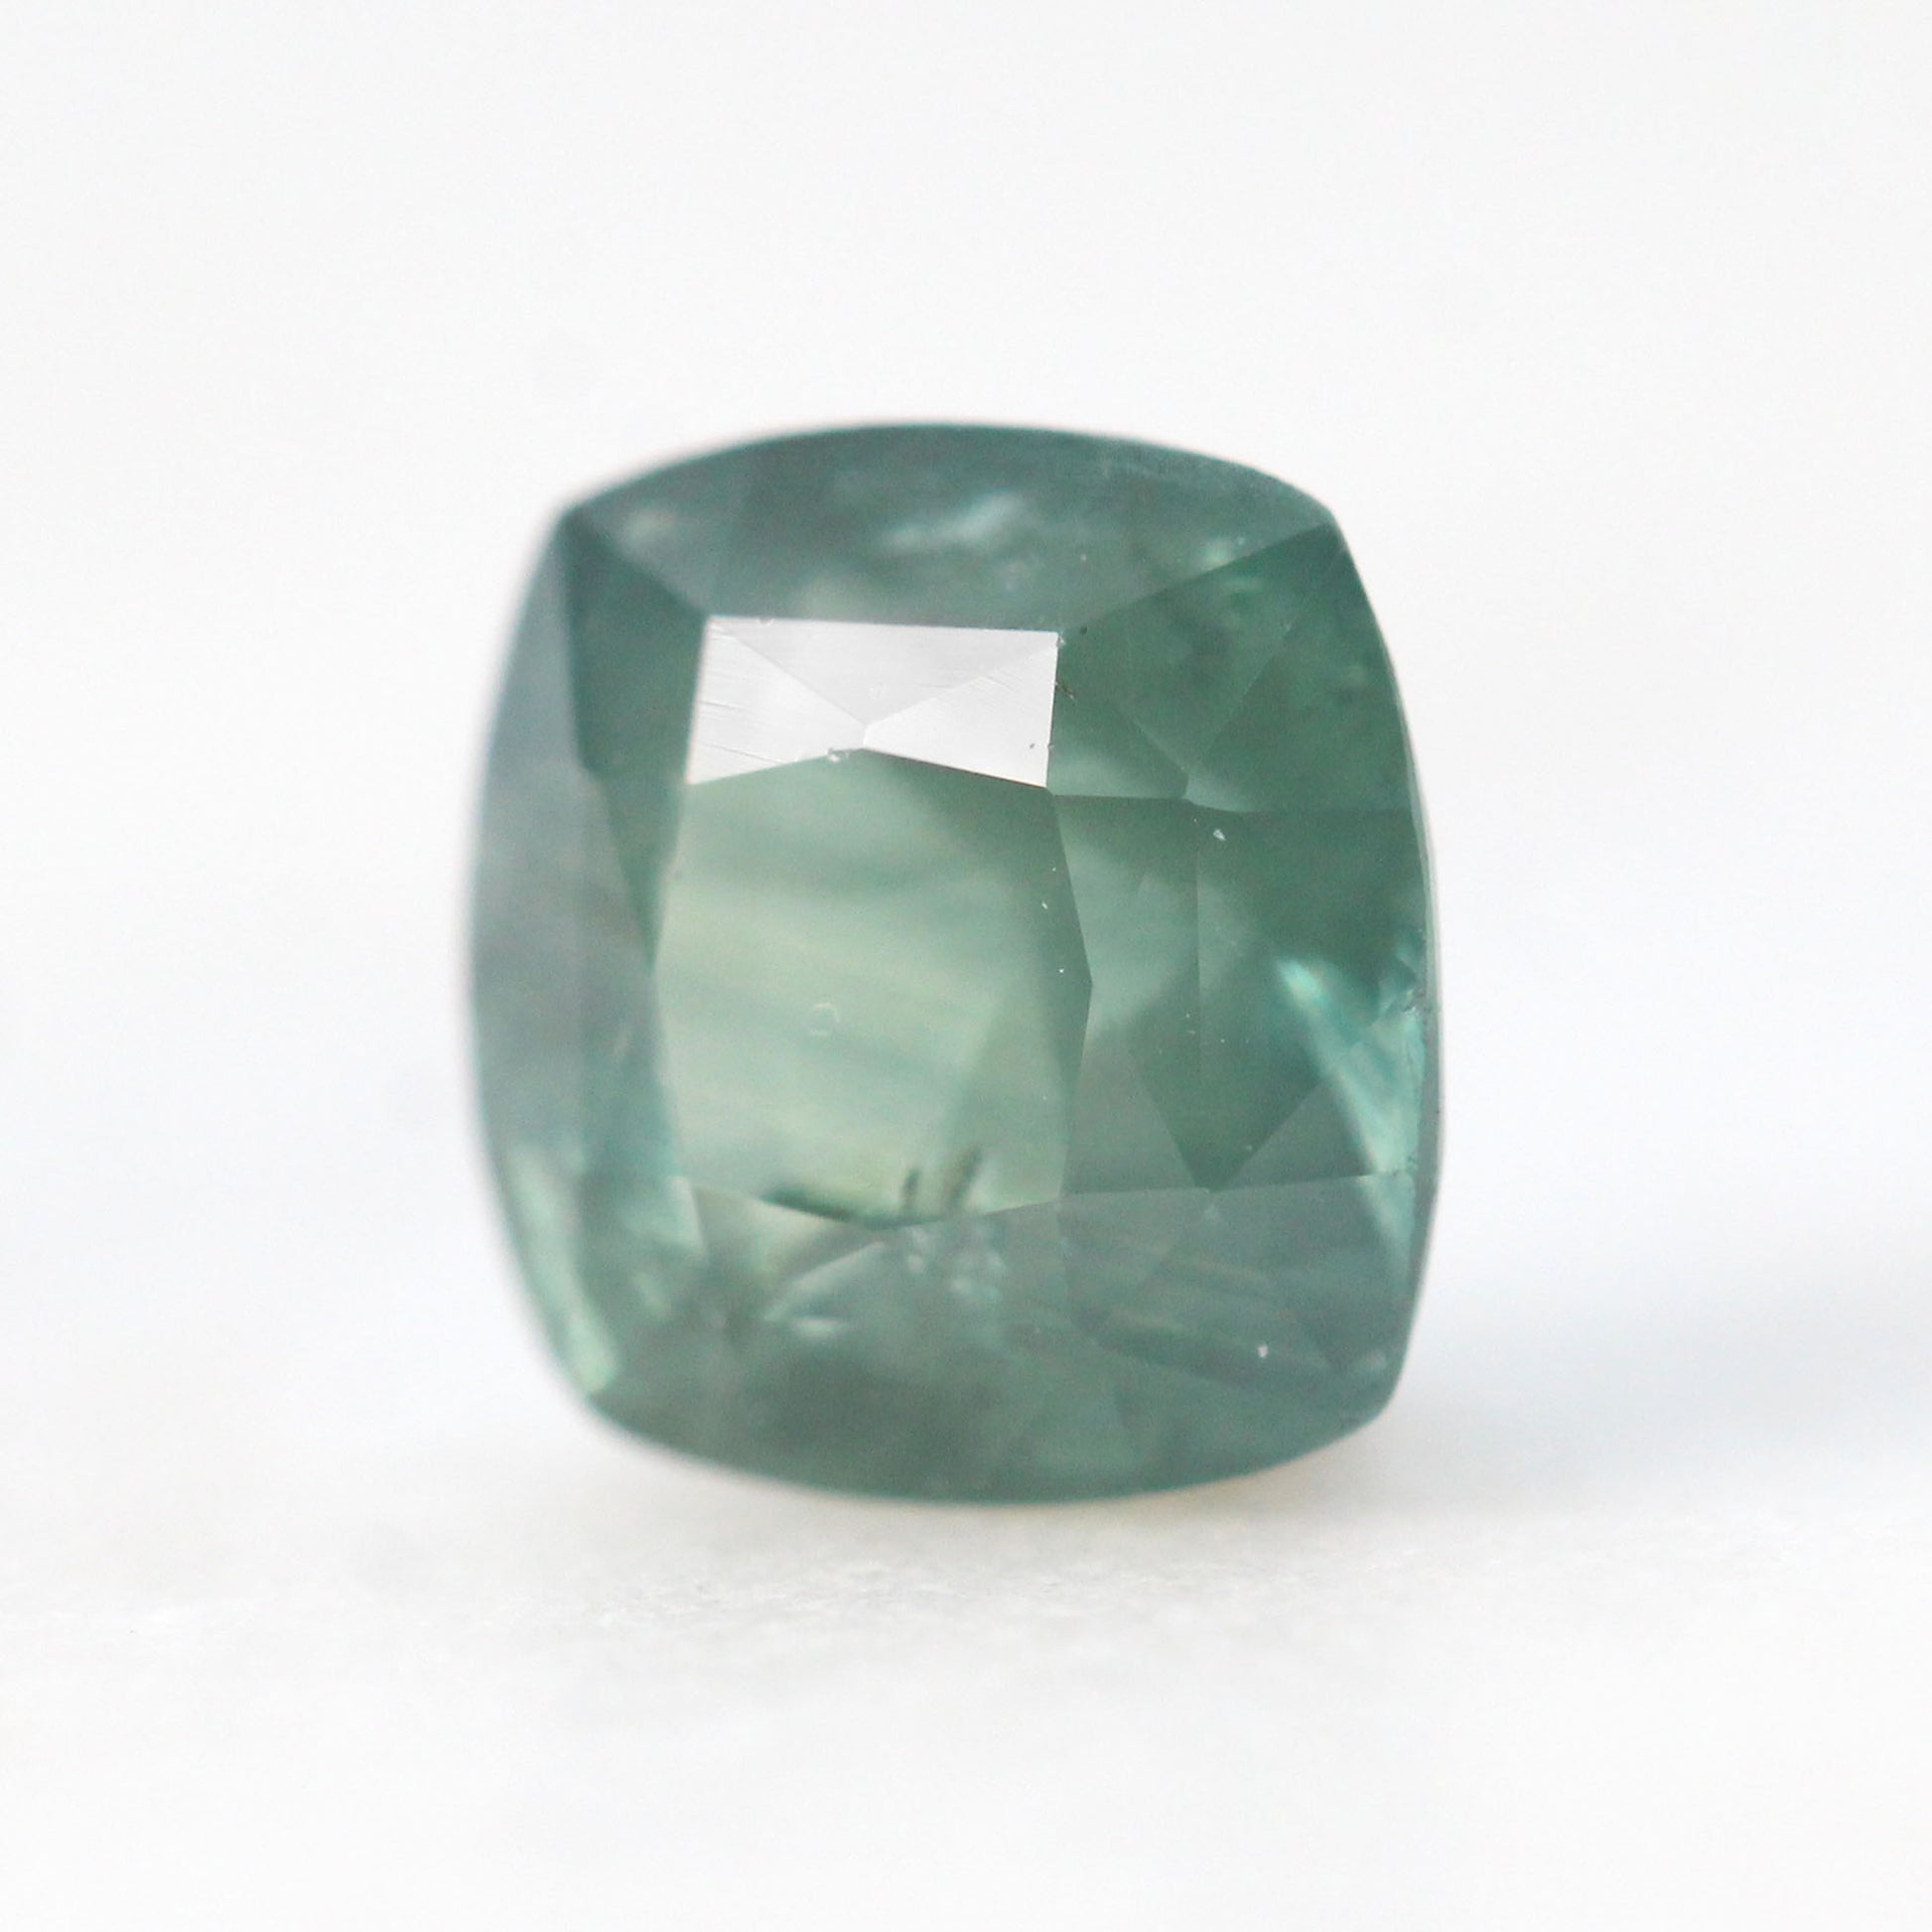 1.47 Carat Light Teal Cushion Sapphire for Custom Work - Inventory Code TCS147 - Midwinter Co. Alternative Bridal Rings and Modern Fine Jewelry